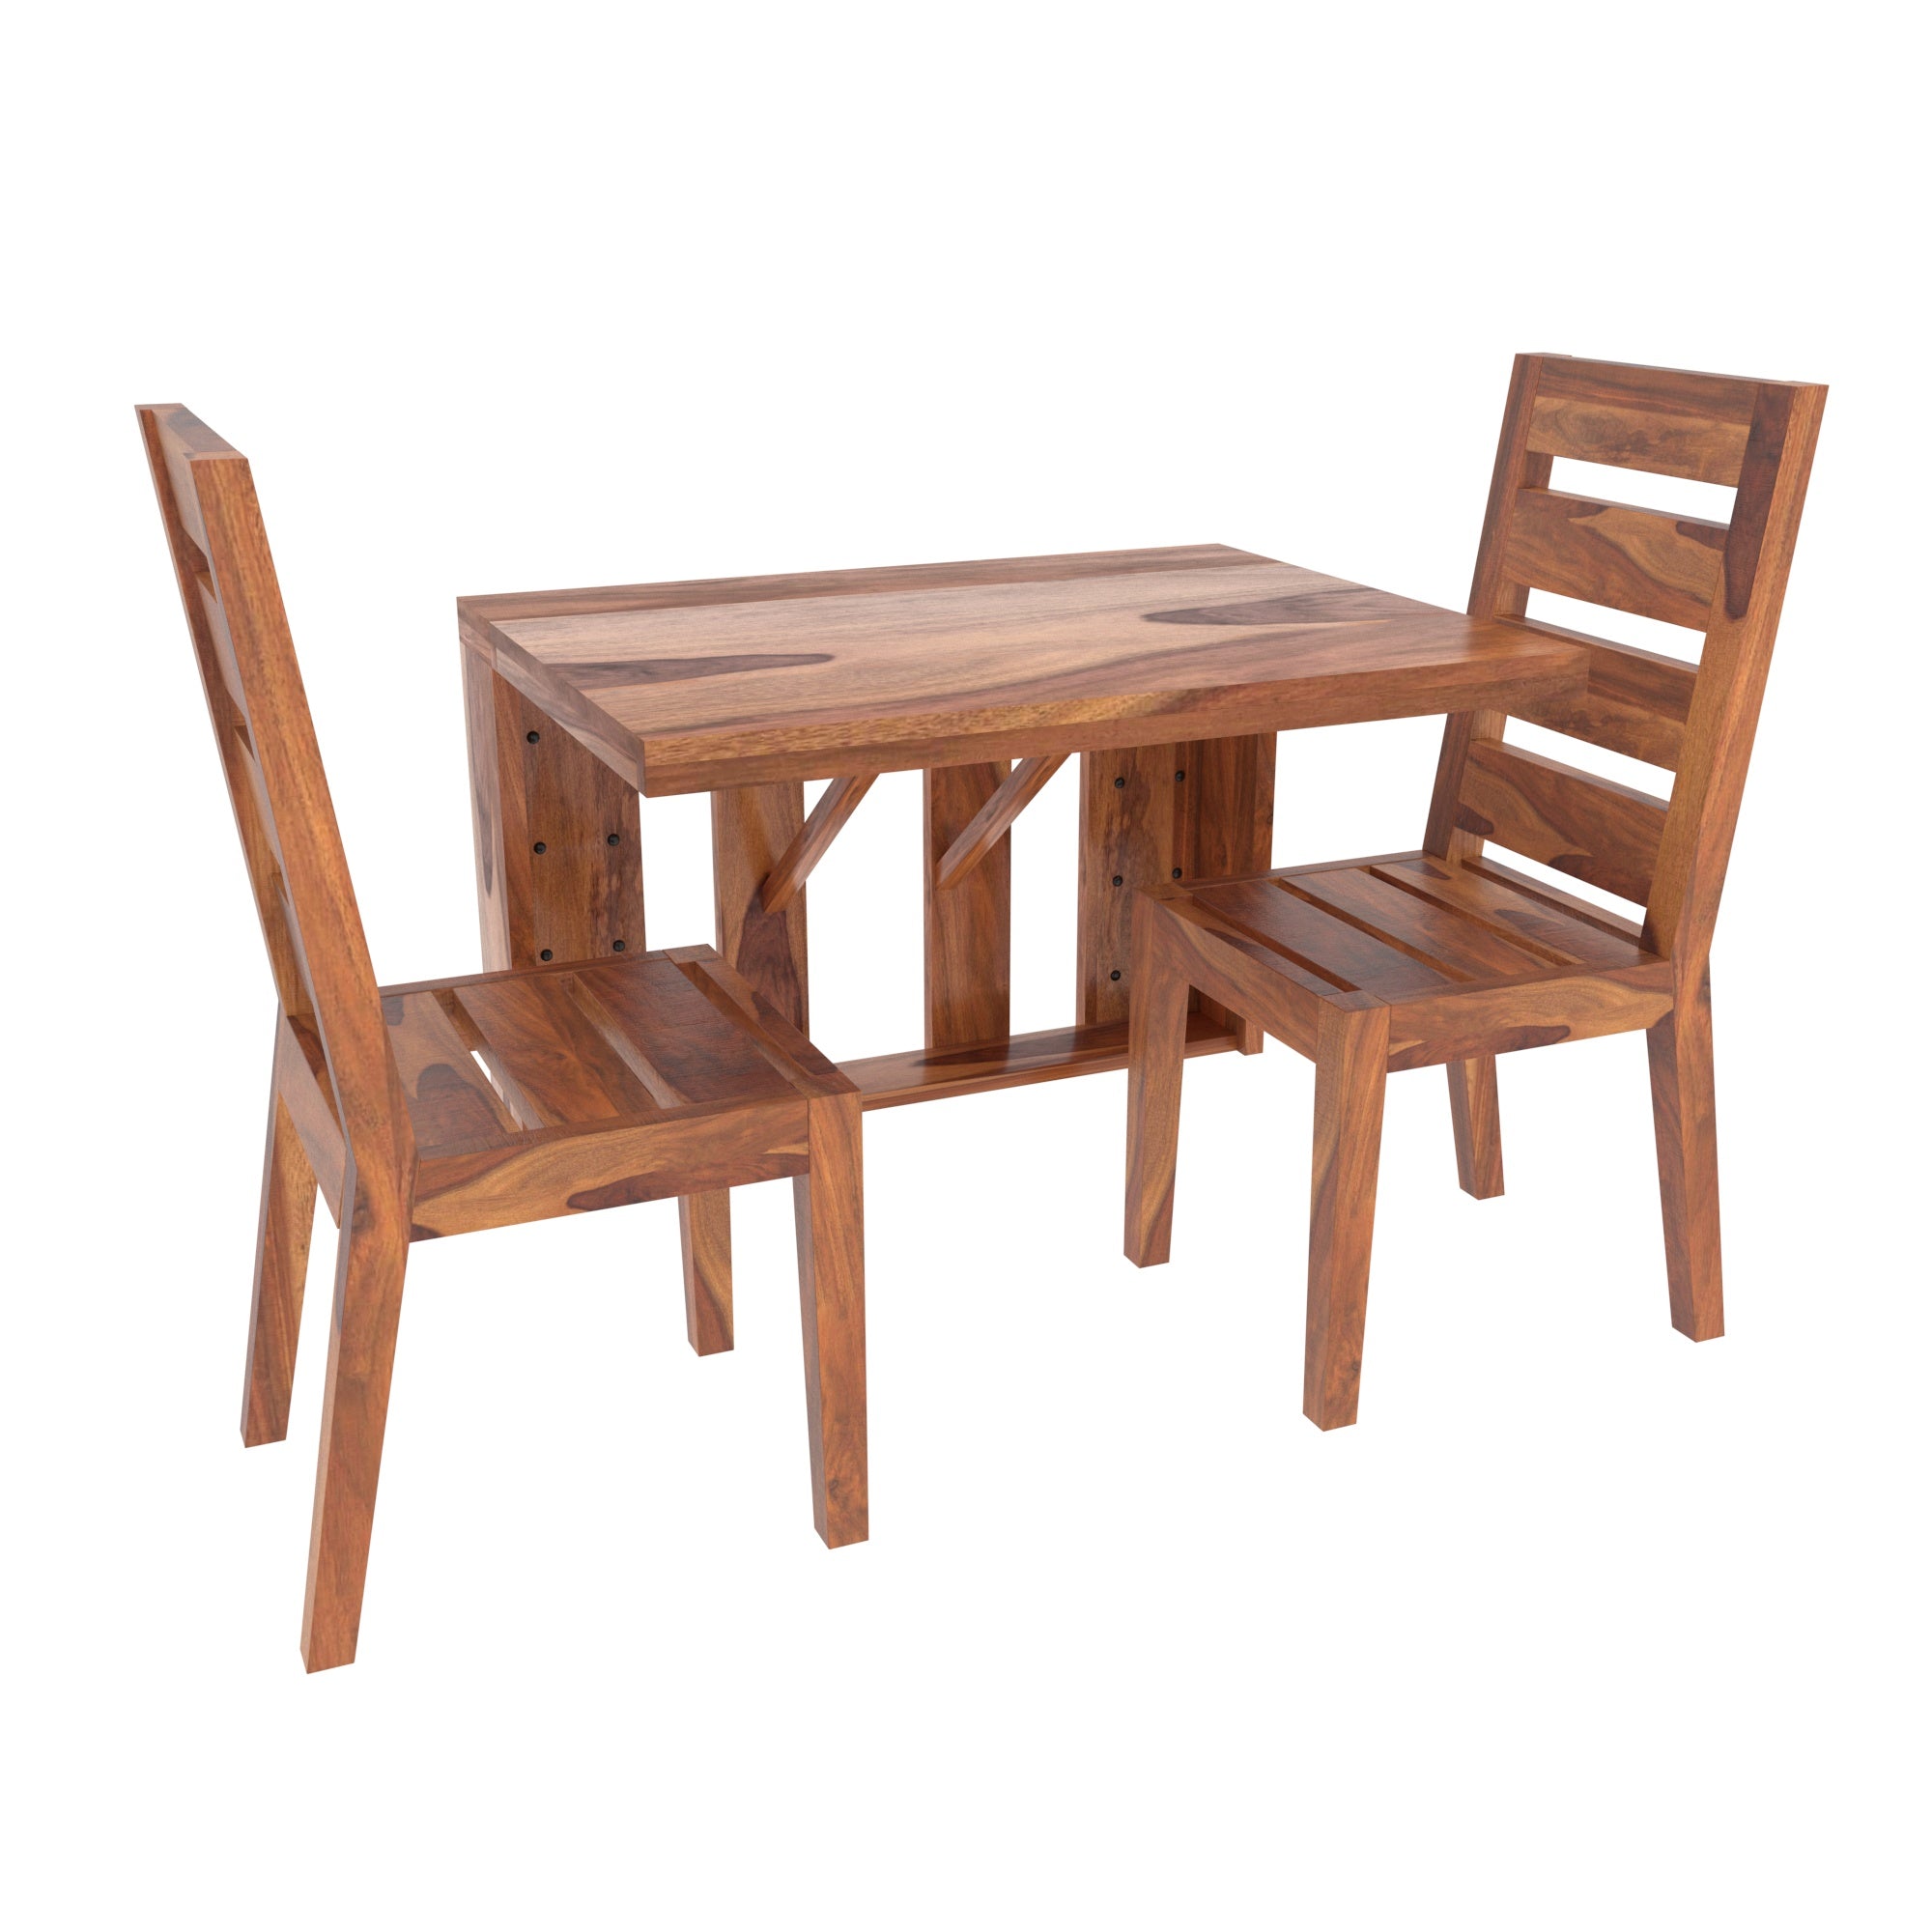 Southern Classic Folding Single Dining Table and Chairs Set of 2 Dining Set